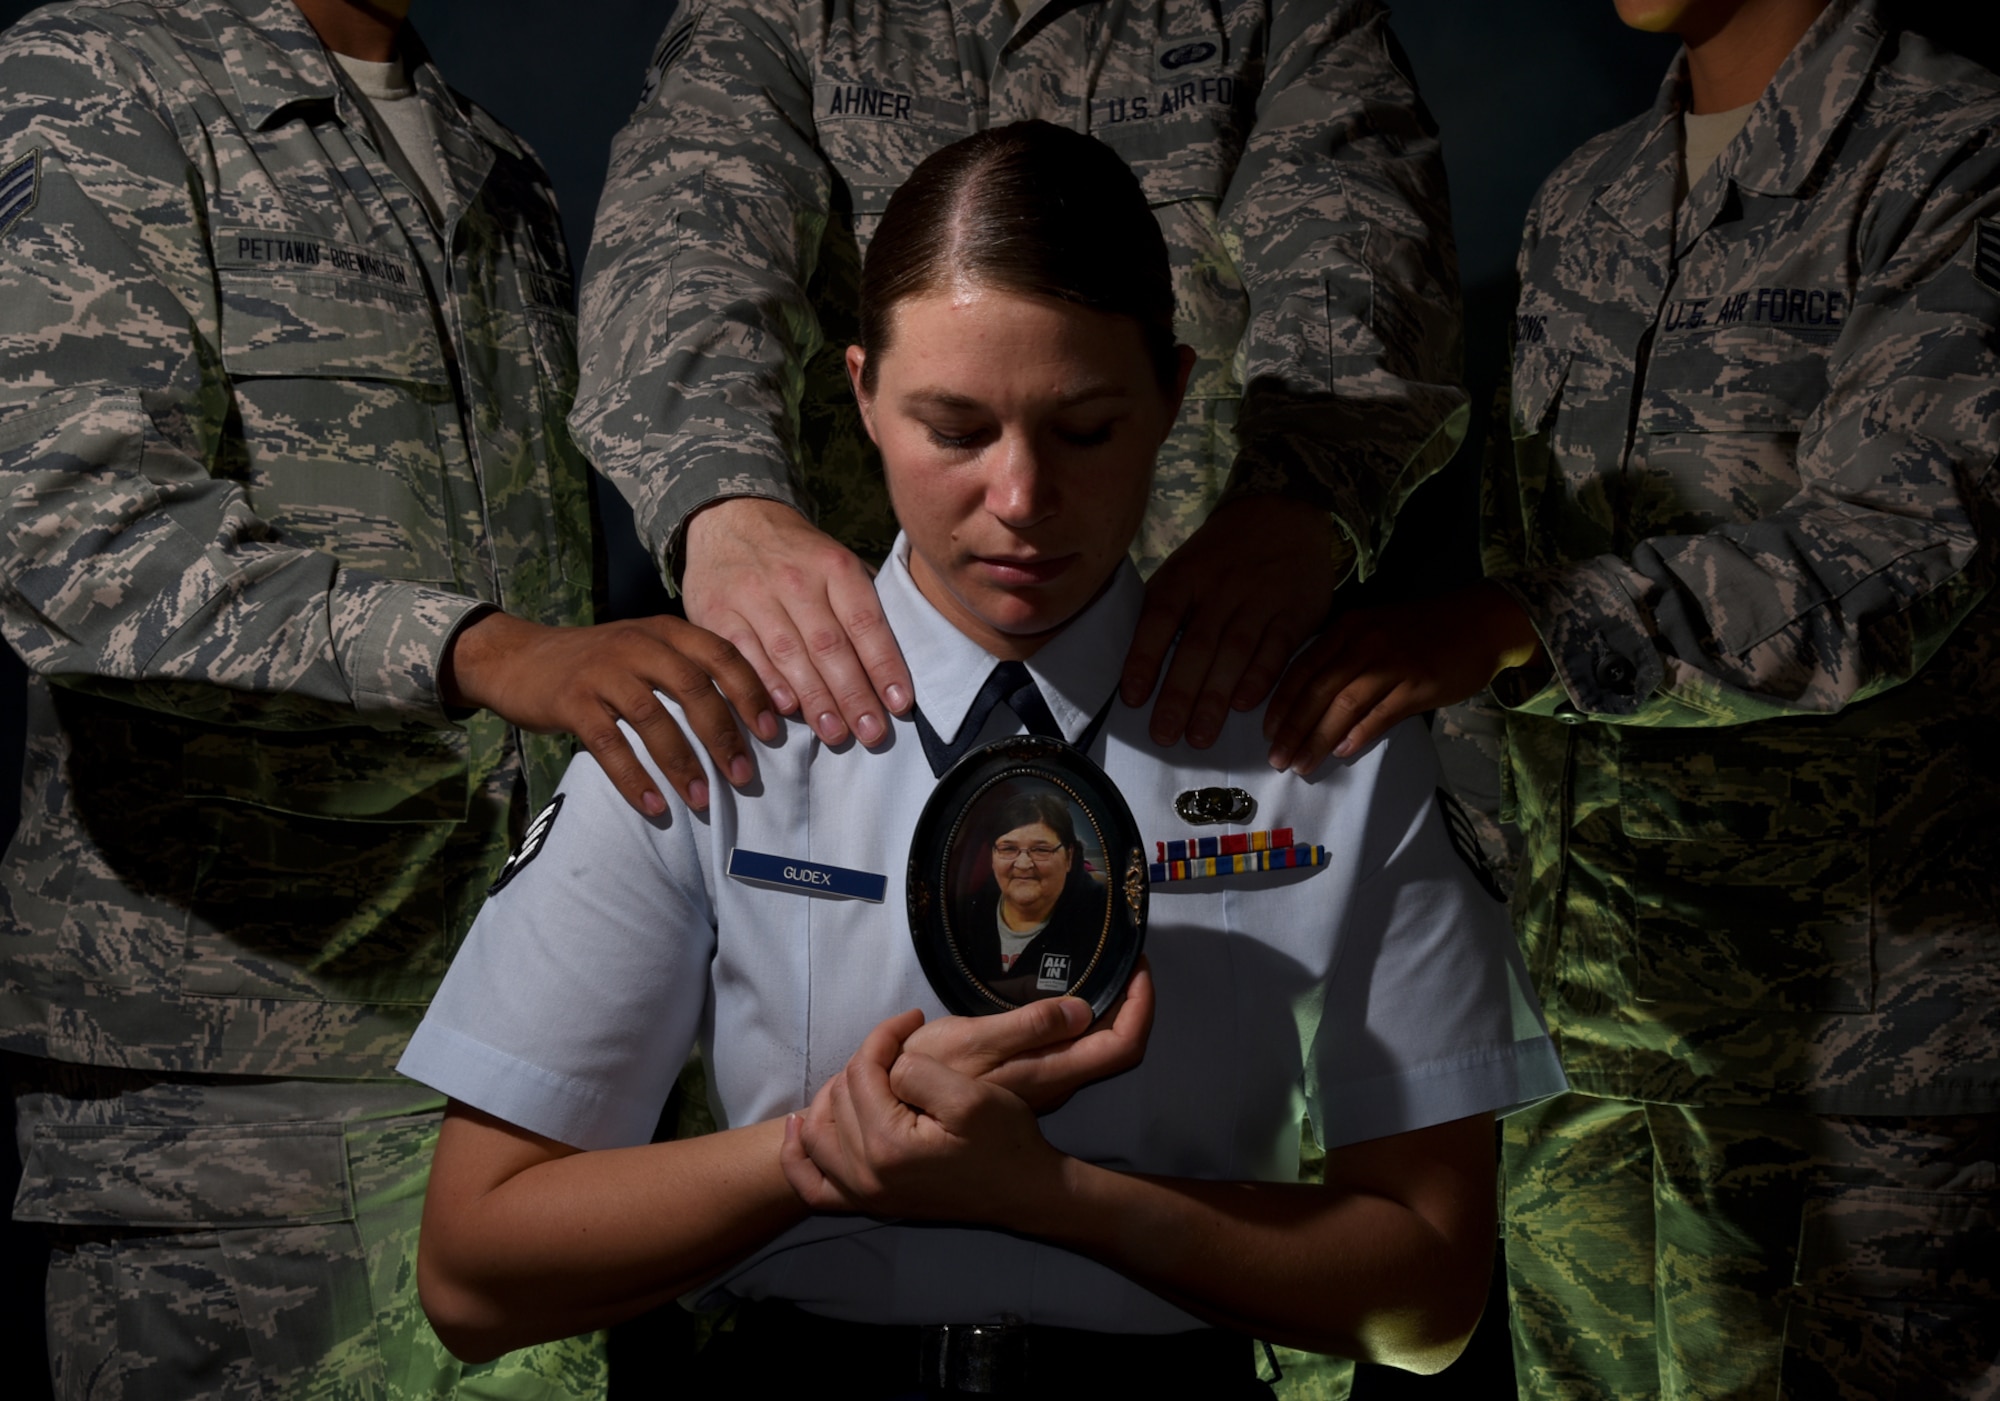 PETERSON AIR FORCE BASE, Colo. – Senior Airman Rose Gudex, 21st Space Wing Public Affairs photojournalist, surrounds herself with her Air Force family from Peterson Air Force Base, Colo., during difficult times. Gudex didn’t have a solid support system before joining the military, but found a family in her brothers and sisters in arms. (U.S. Air Force photo by Airman 1st Class Dennis Hoffman)